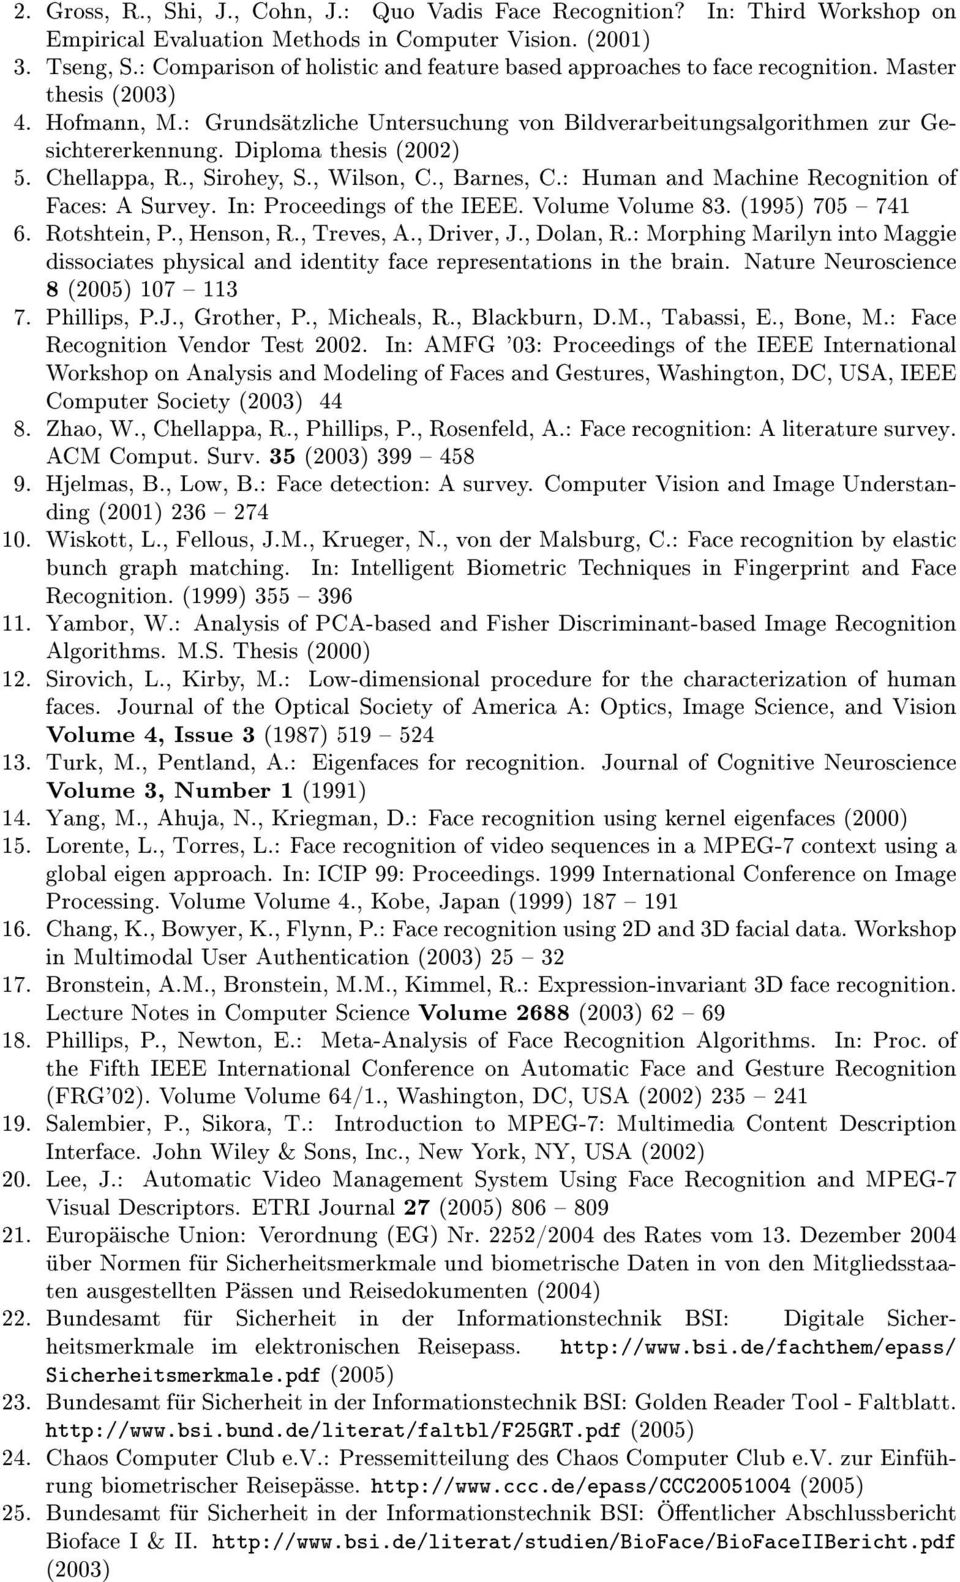 Diploma thesis (2002) 5. Chellappa, R., Sirohey, S., Wilson, C., Barnes, C.: Human and Machine Recognition of Faces: A Survey. In: Proceedings of the IEEE. Volume Volume 83. (1995) 705 741 6.